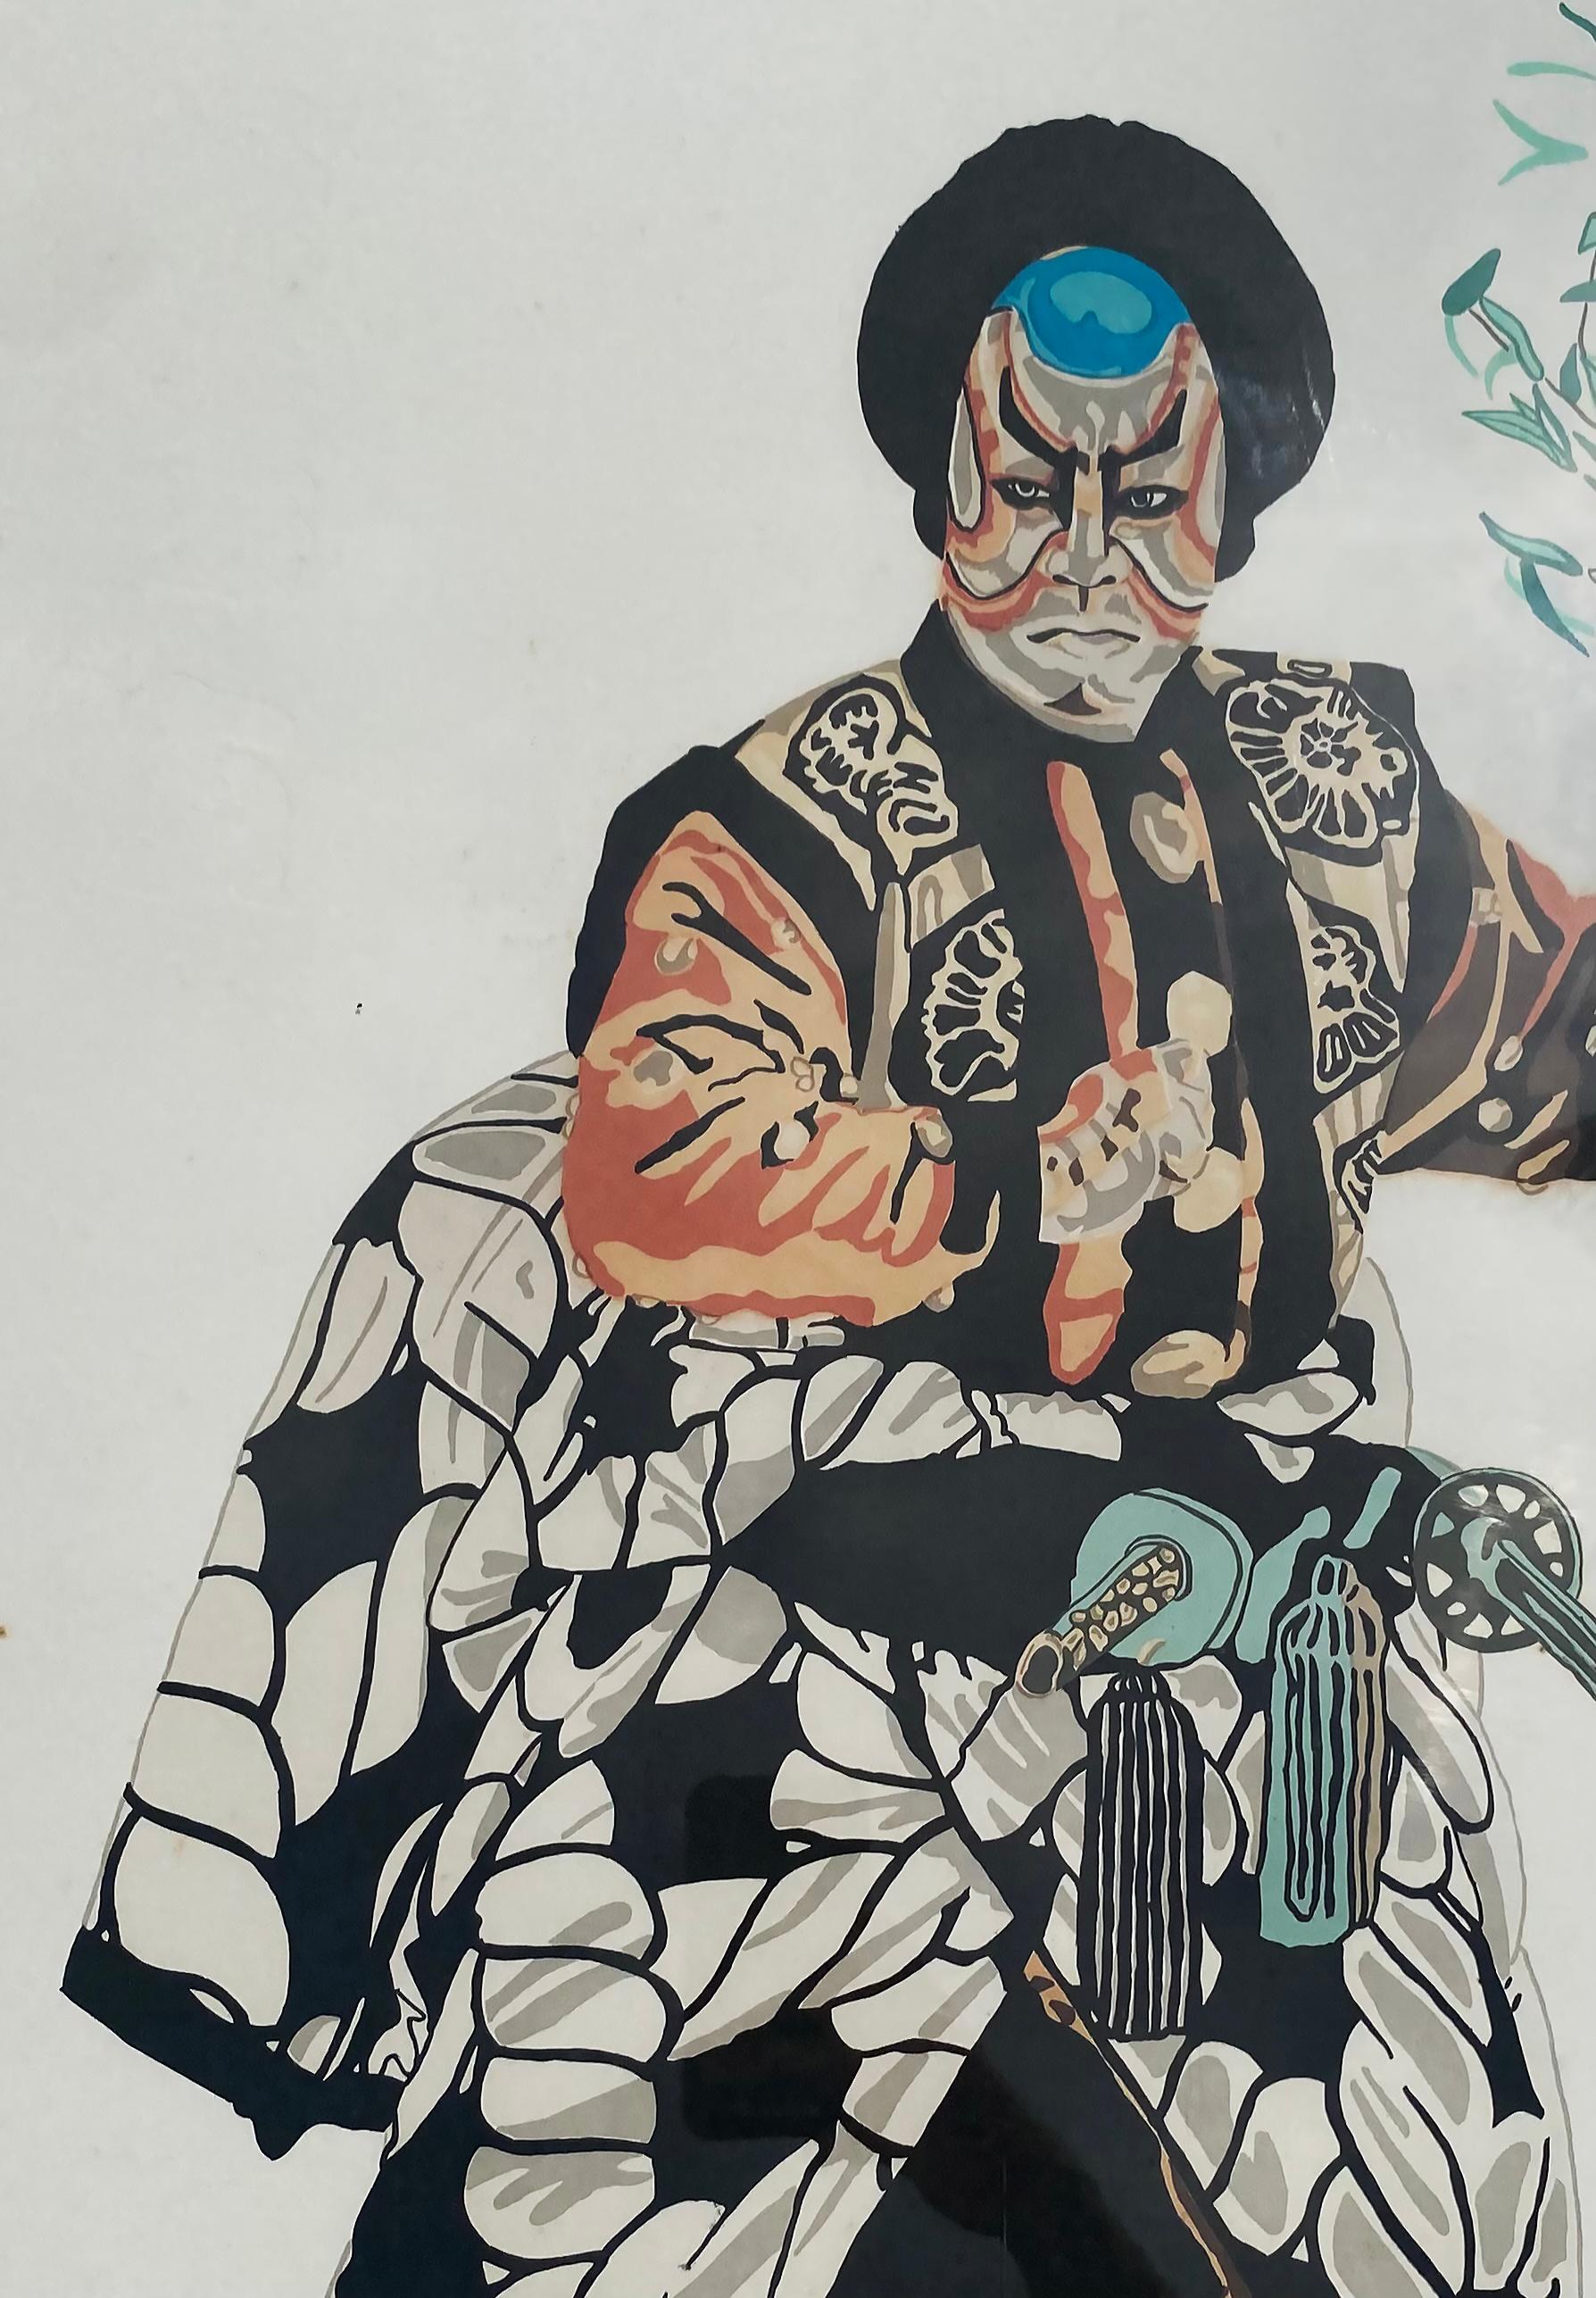 Color Lithograph of Japanese Kabuki Theater Figure, Pencil Signed and Numbered 

Offered for sale is a color lithograph of a Japanese Kabuki theater male figure which is pencil singed by the artist and numbered 120/425.  The lithograph is framed in